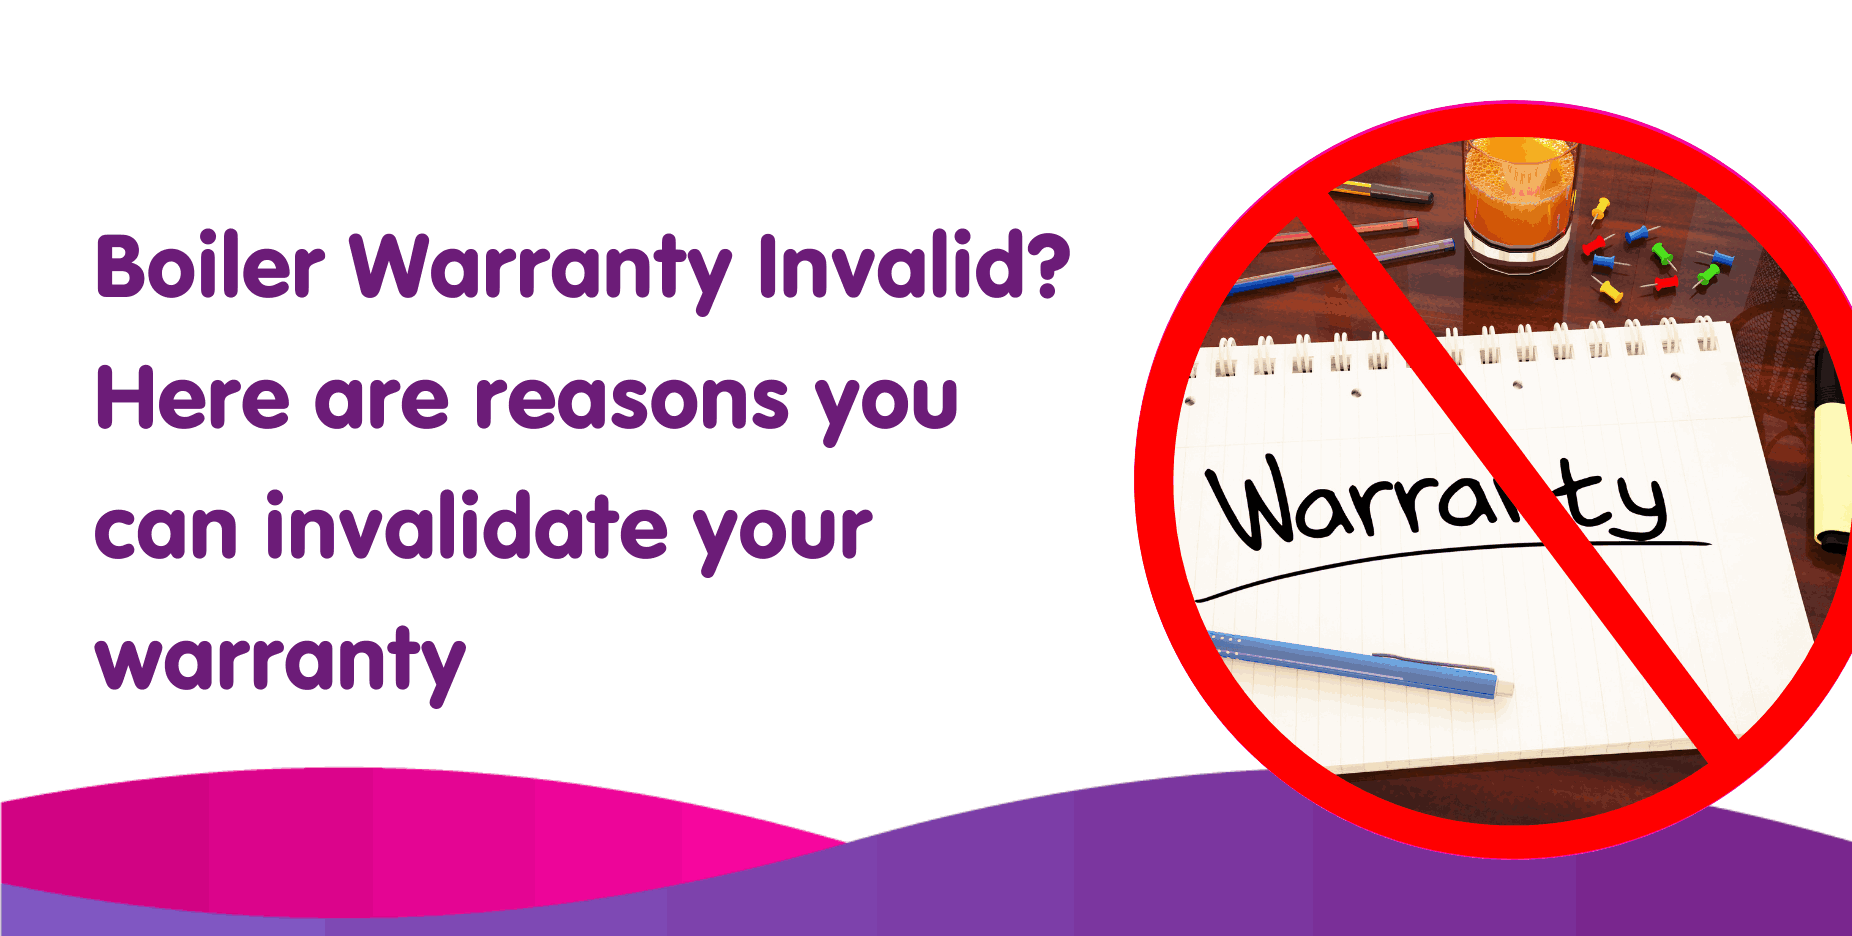 Boiler Warranty Invalid? Here are reasons you can invalidate your warranty